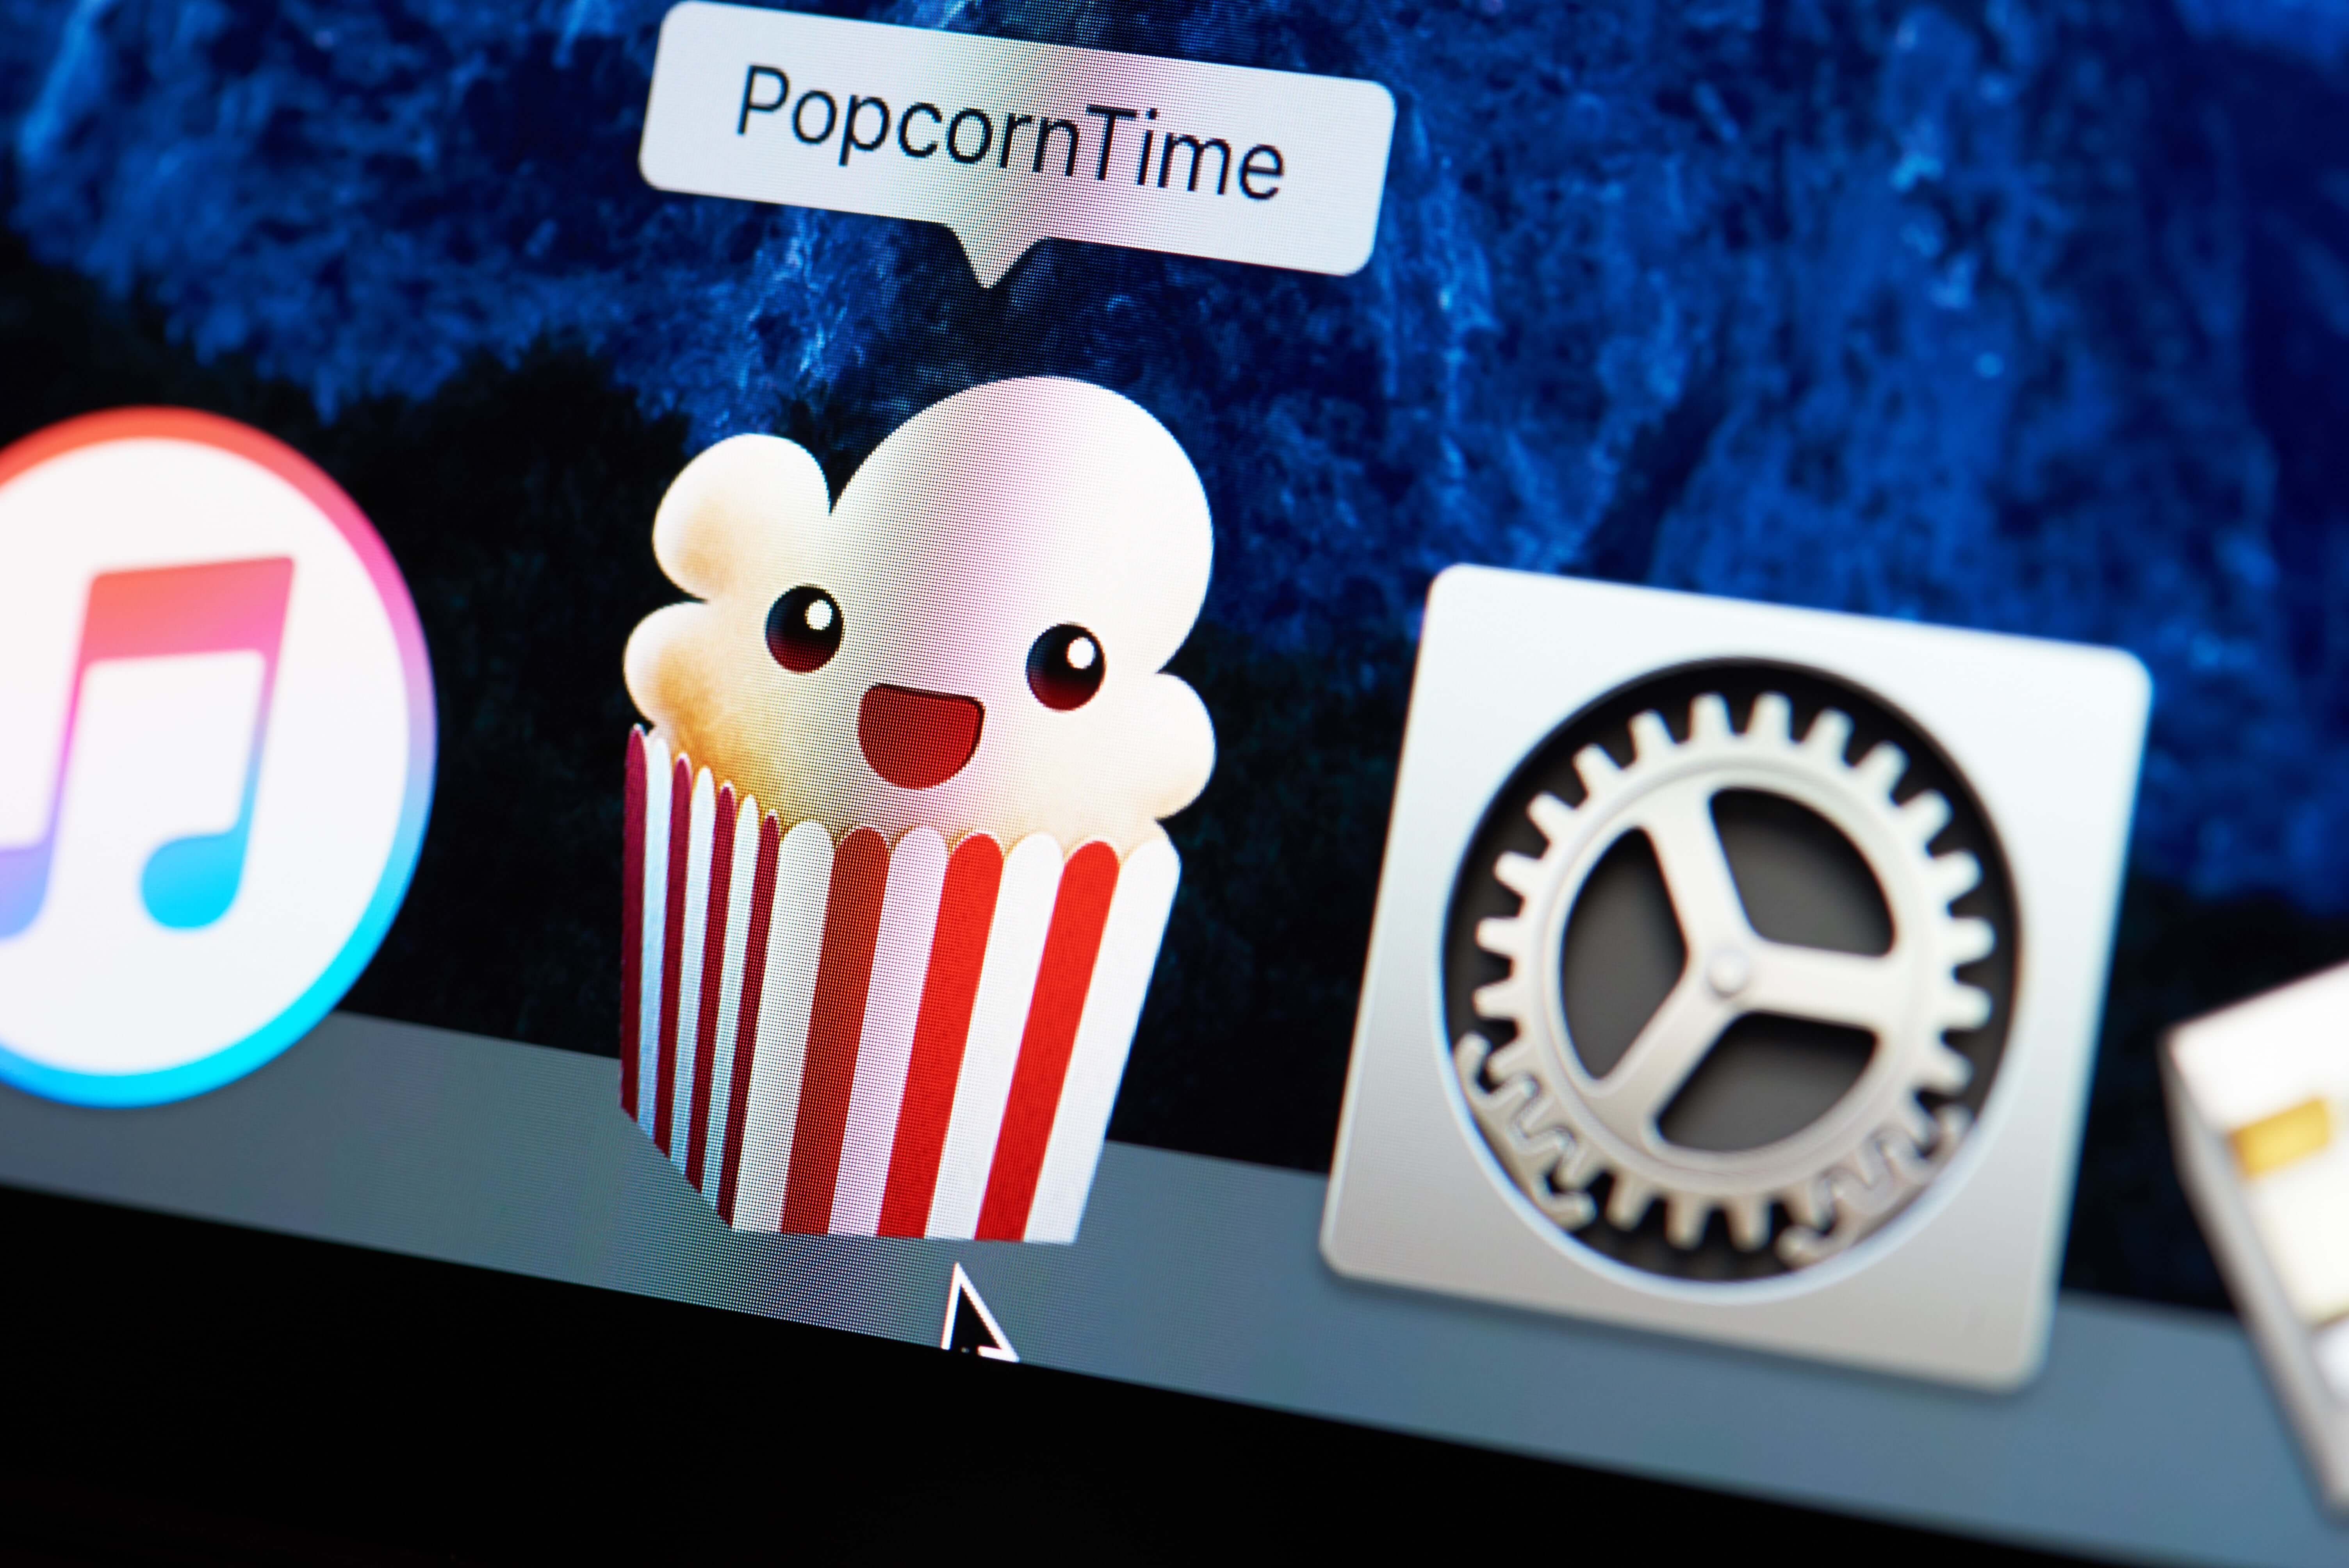 popcorn time initial release